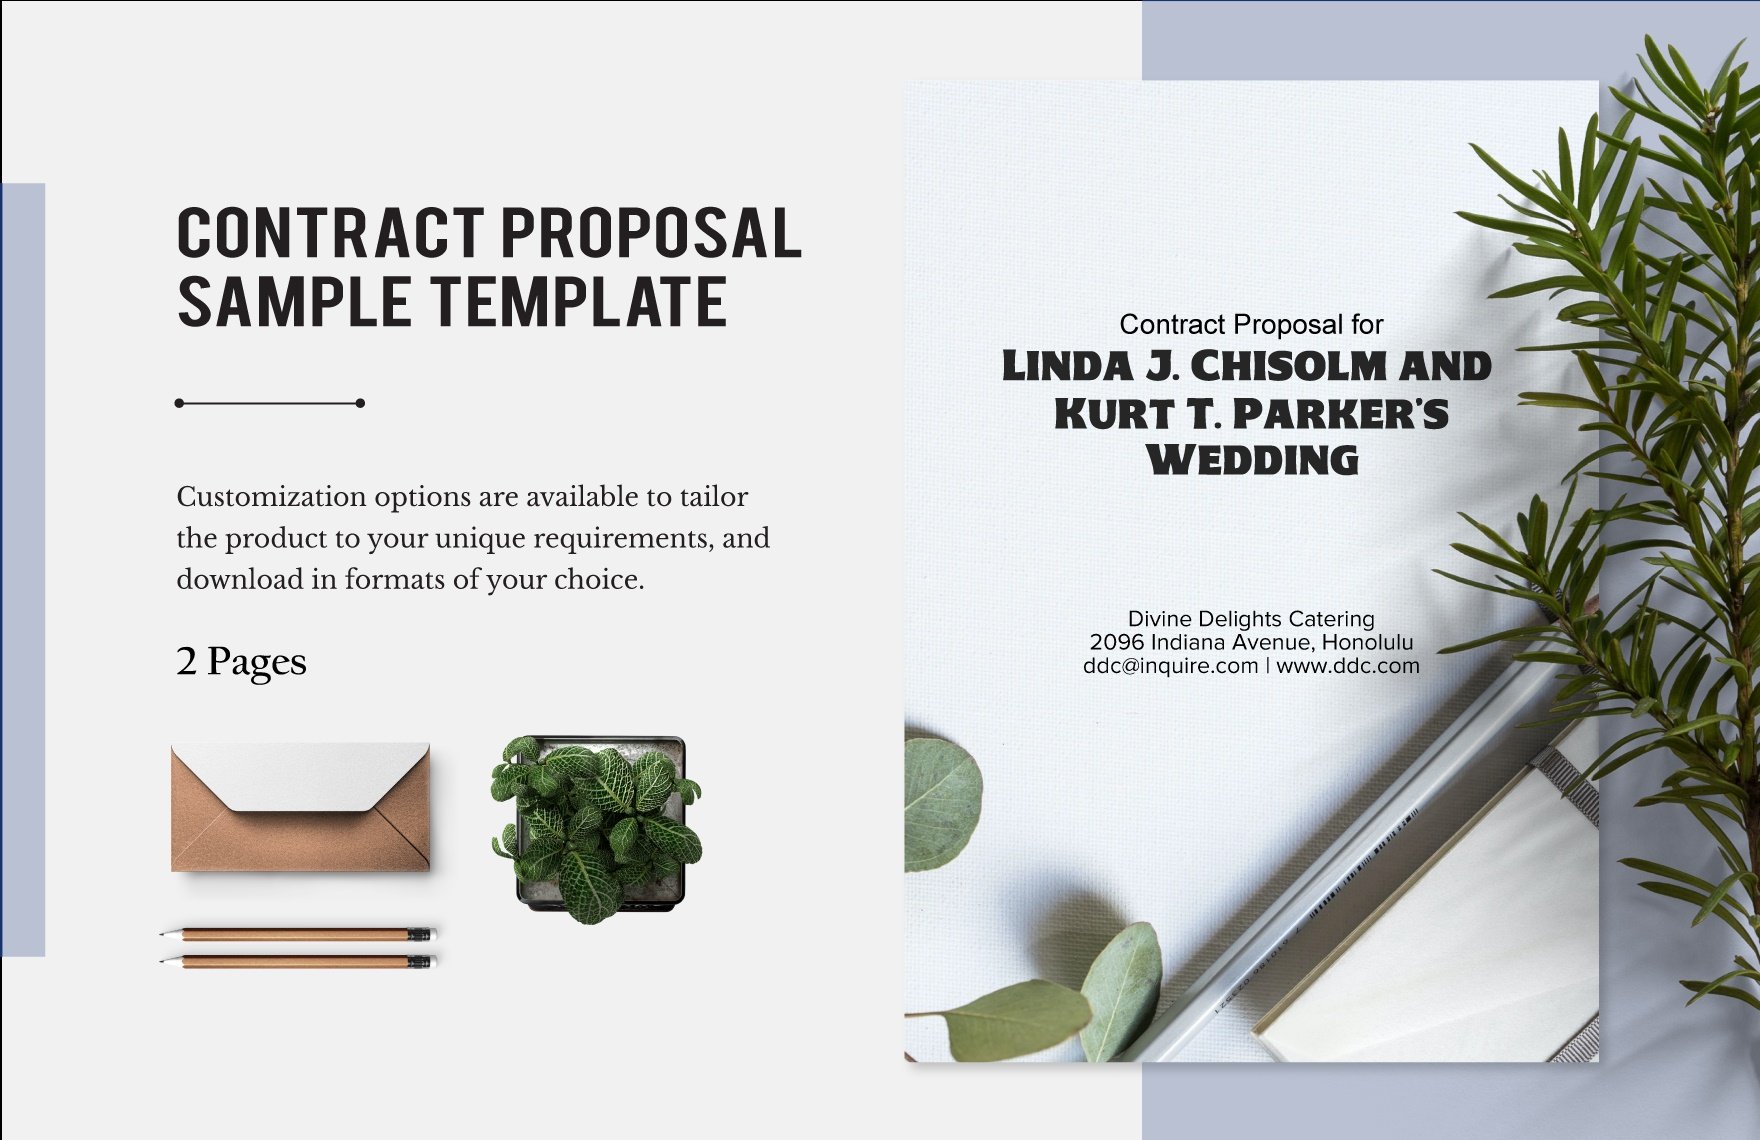 Contract Proposal Sample Template